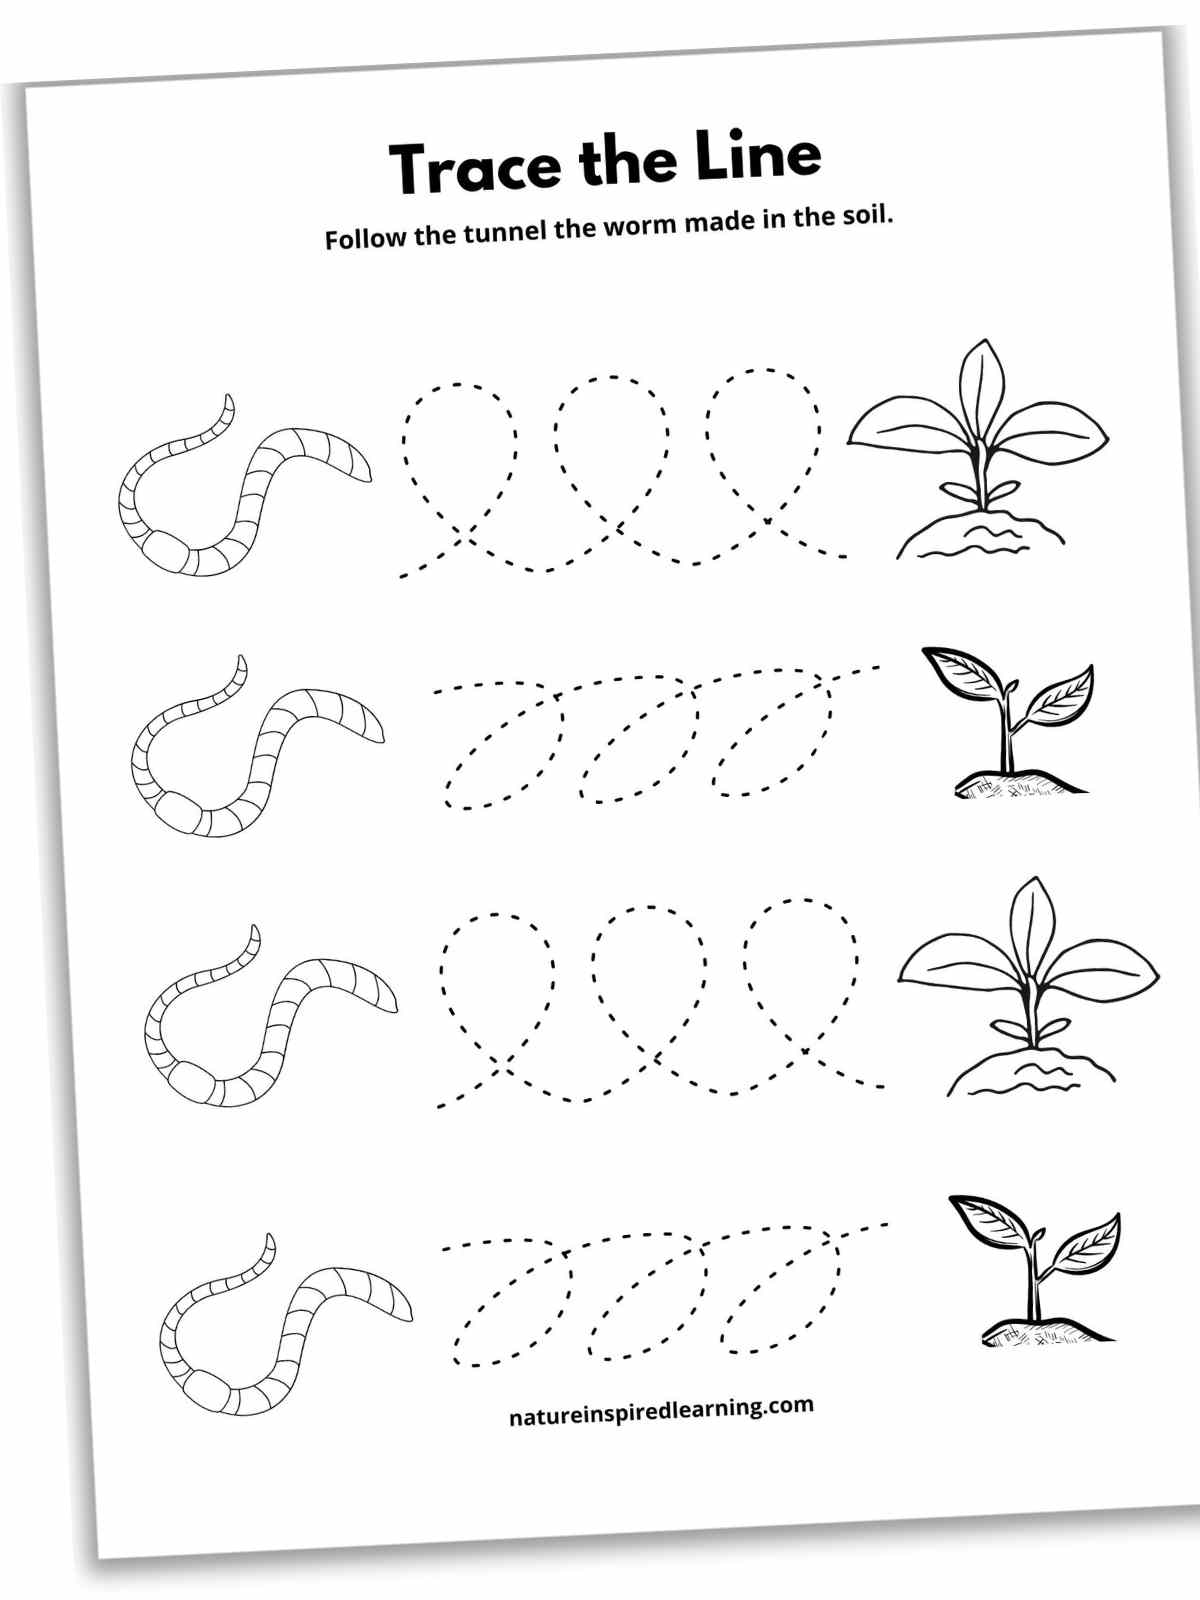 Black and white worksheet with four sets of dotted curved lines in between worms and sprouts in dirt.